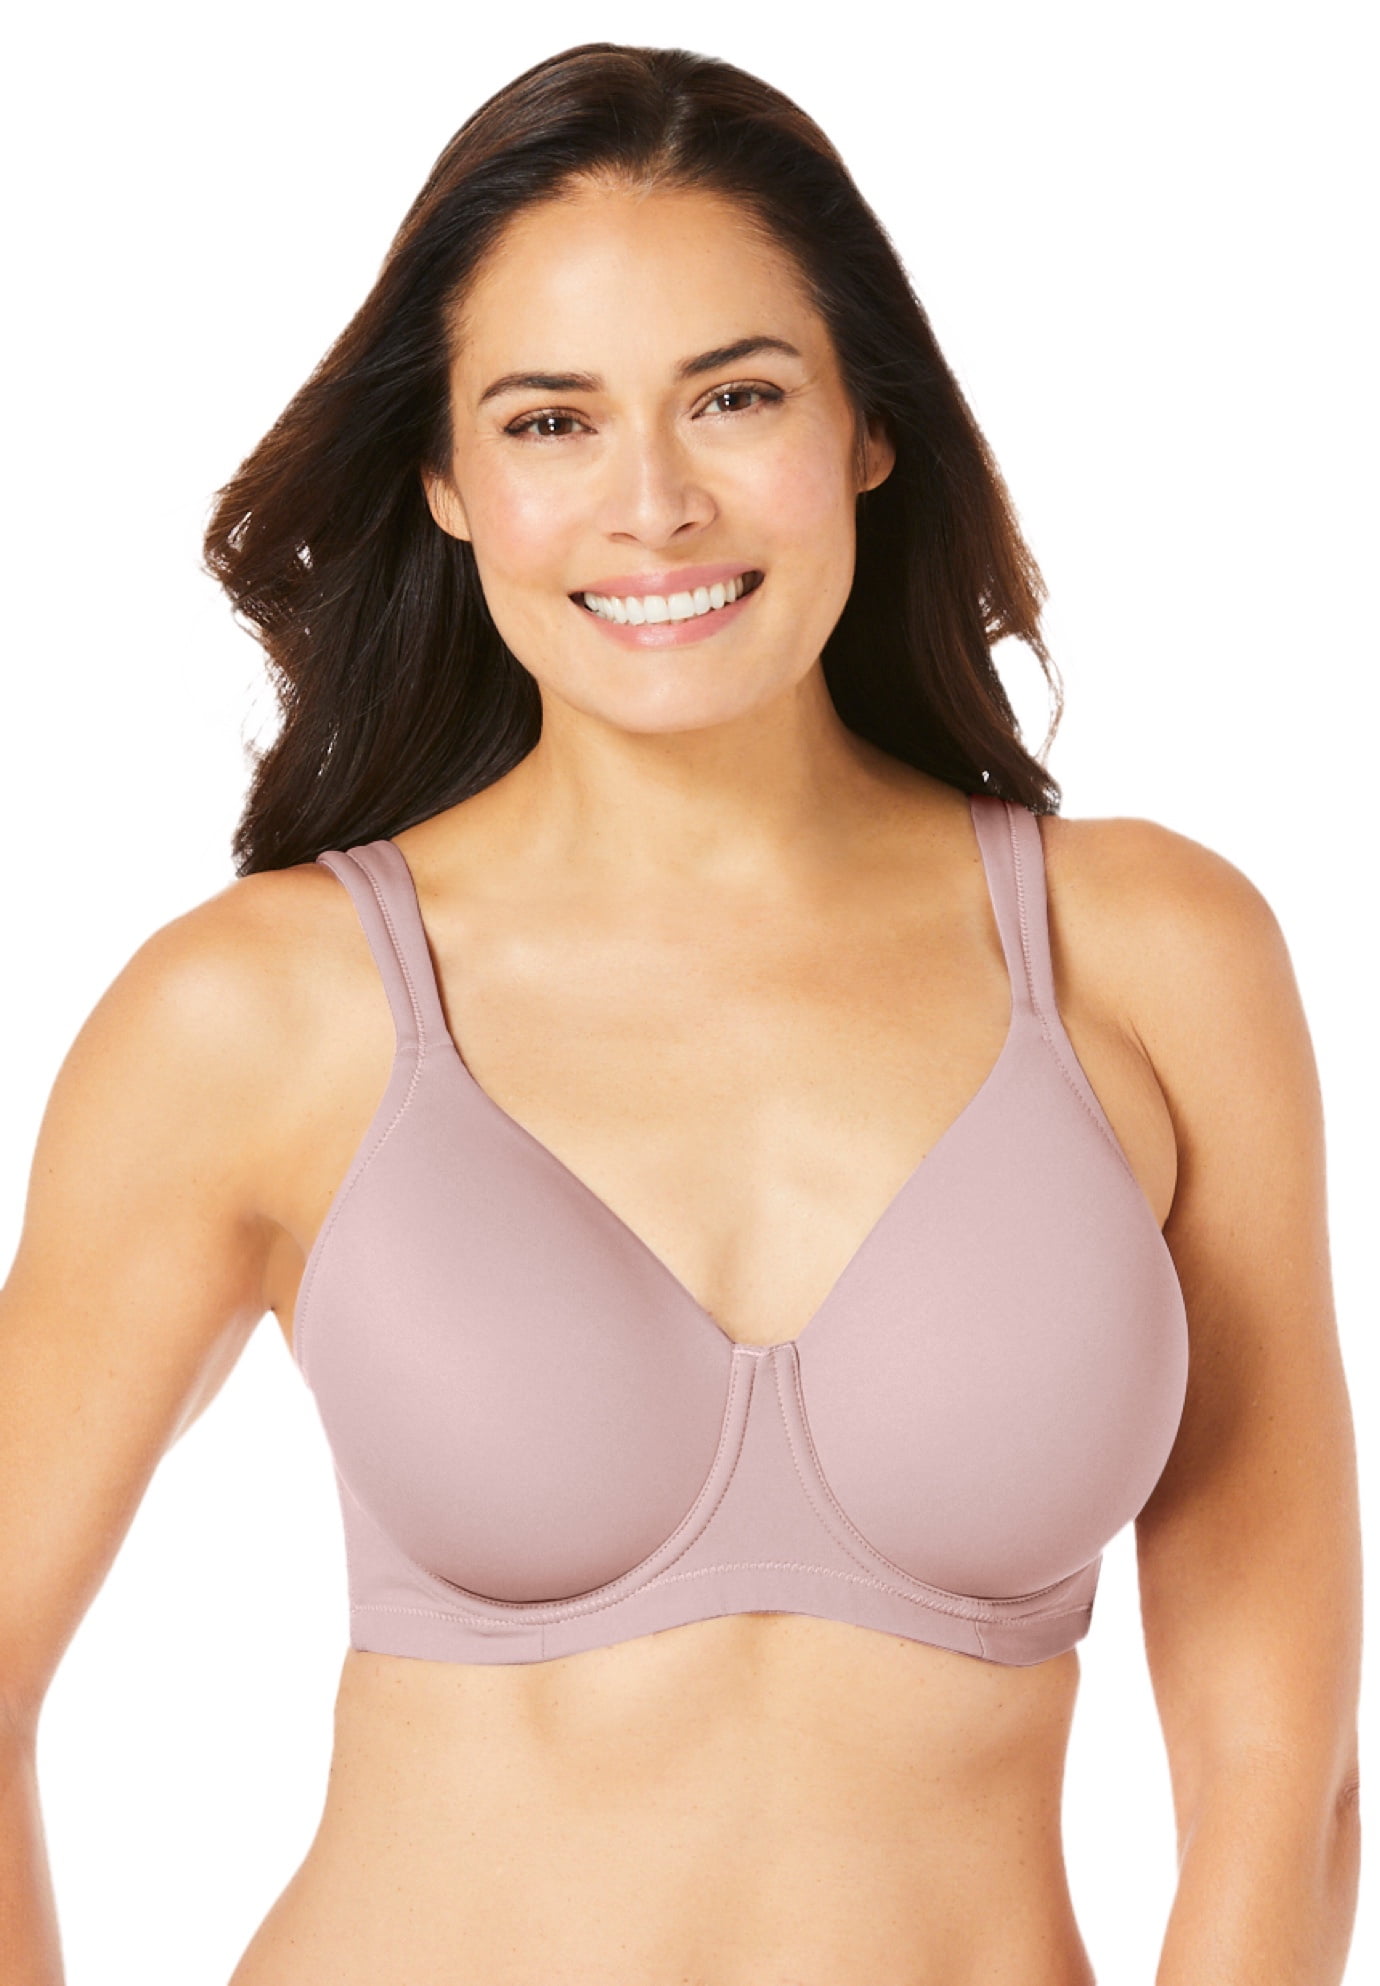 Women's Cotton Full Coverage Wirefree Non-padded Lace Plus Size Bra 46H 